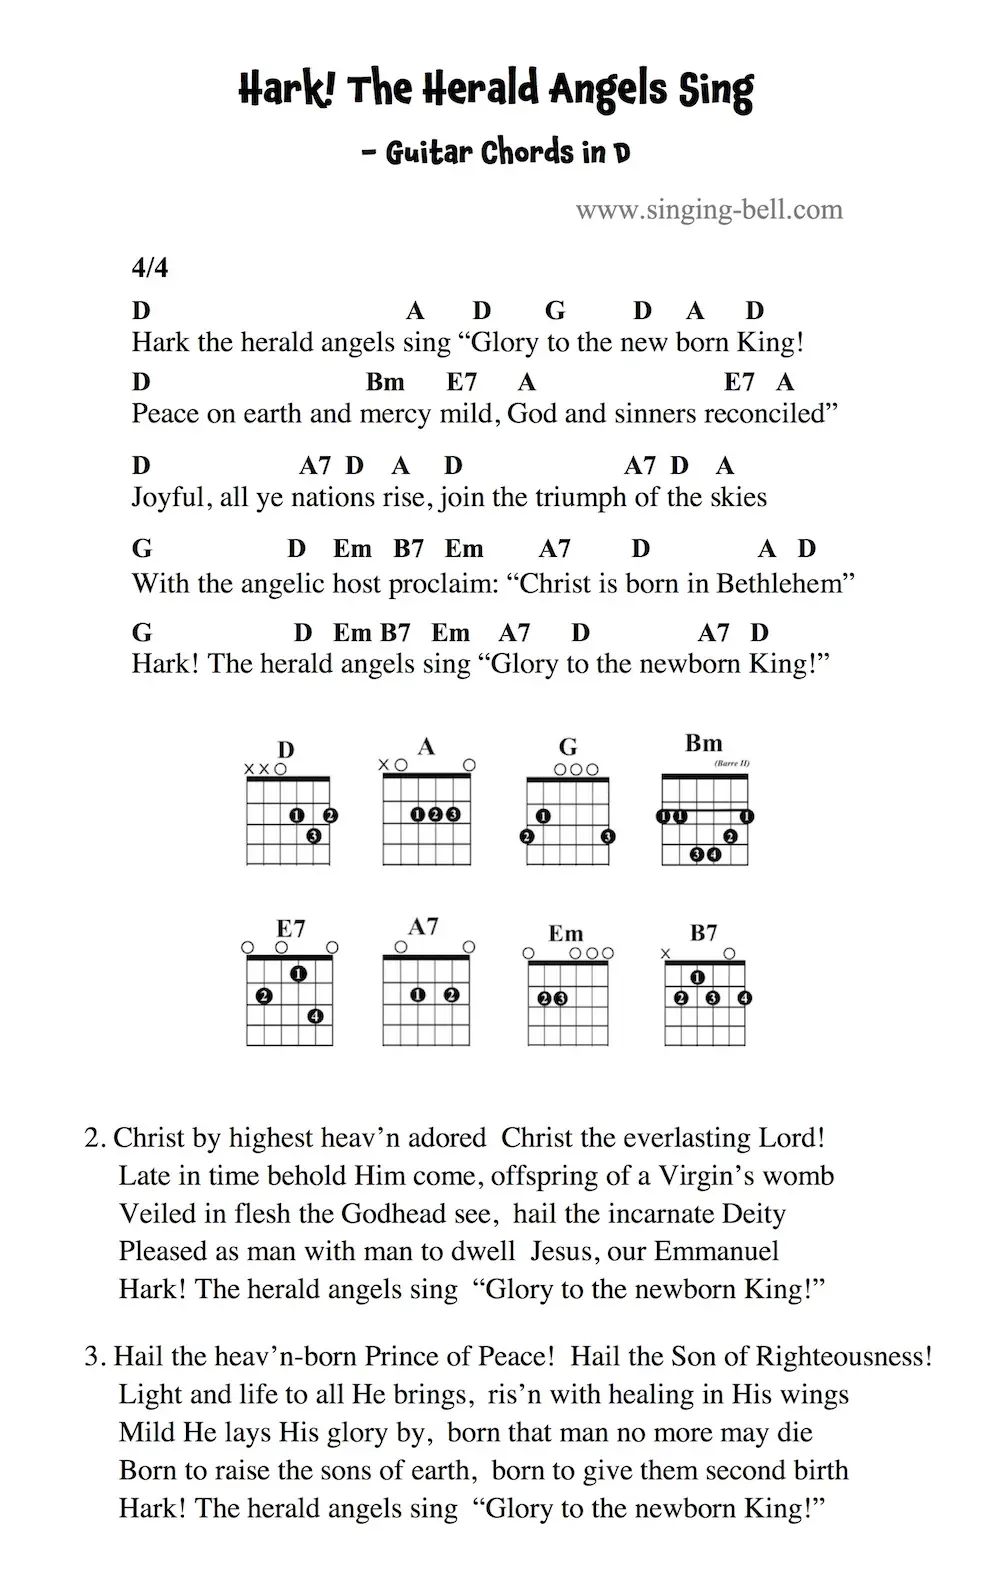 Hark! The Herald Angels Sing - Guitar Chords and Tabs in D.